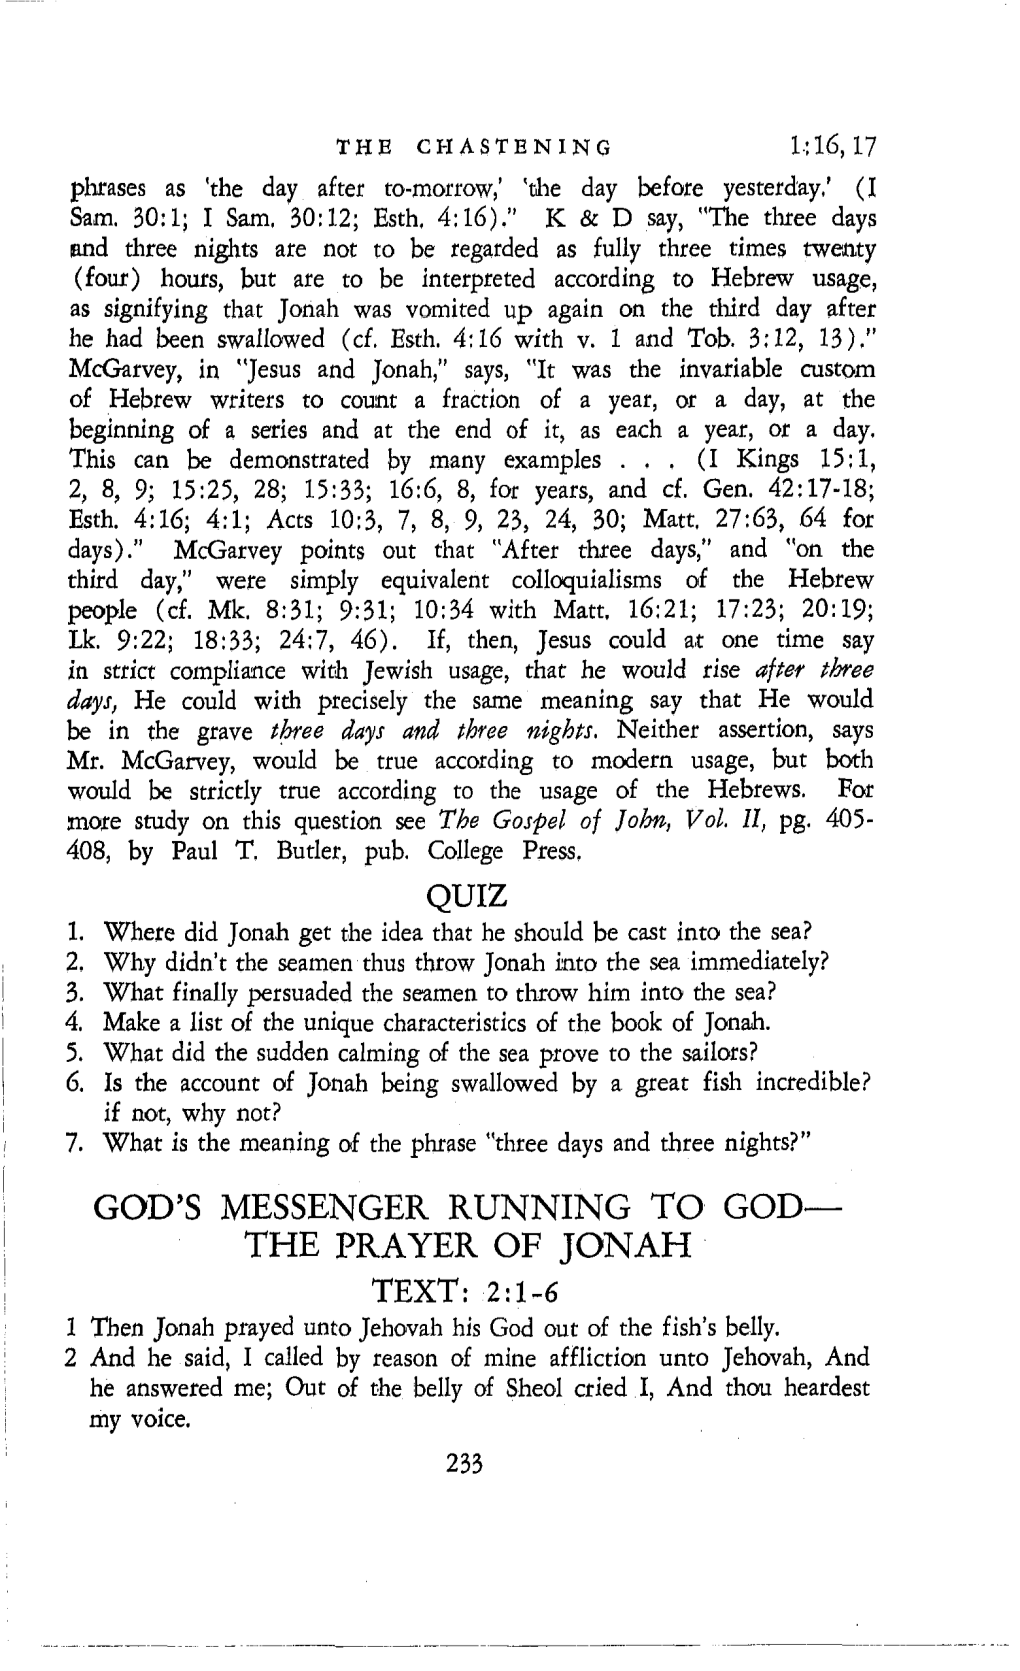 THE PRAYER of JONAH TEXT: 2:L-6 1 Then Jonah Prayed Unto Jehovah His God out of the Fish’S Belly